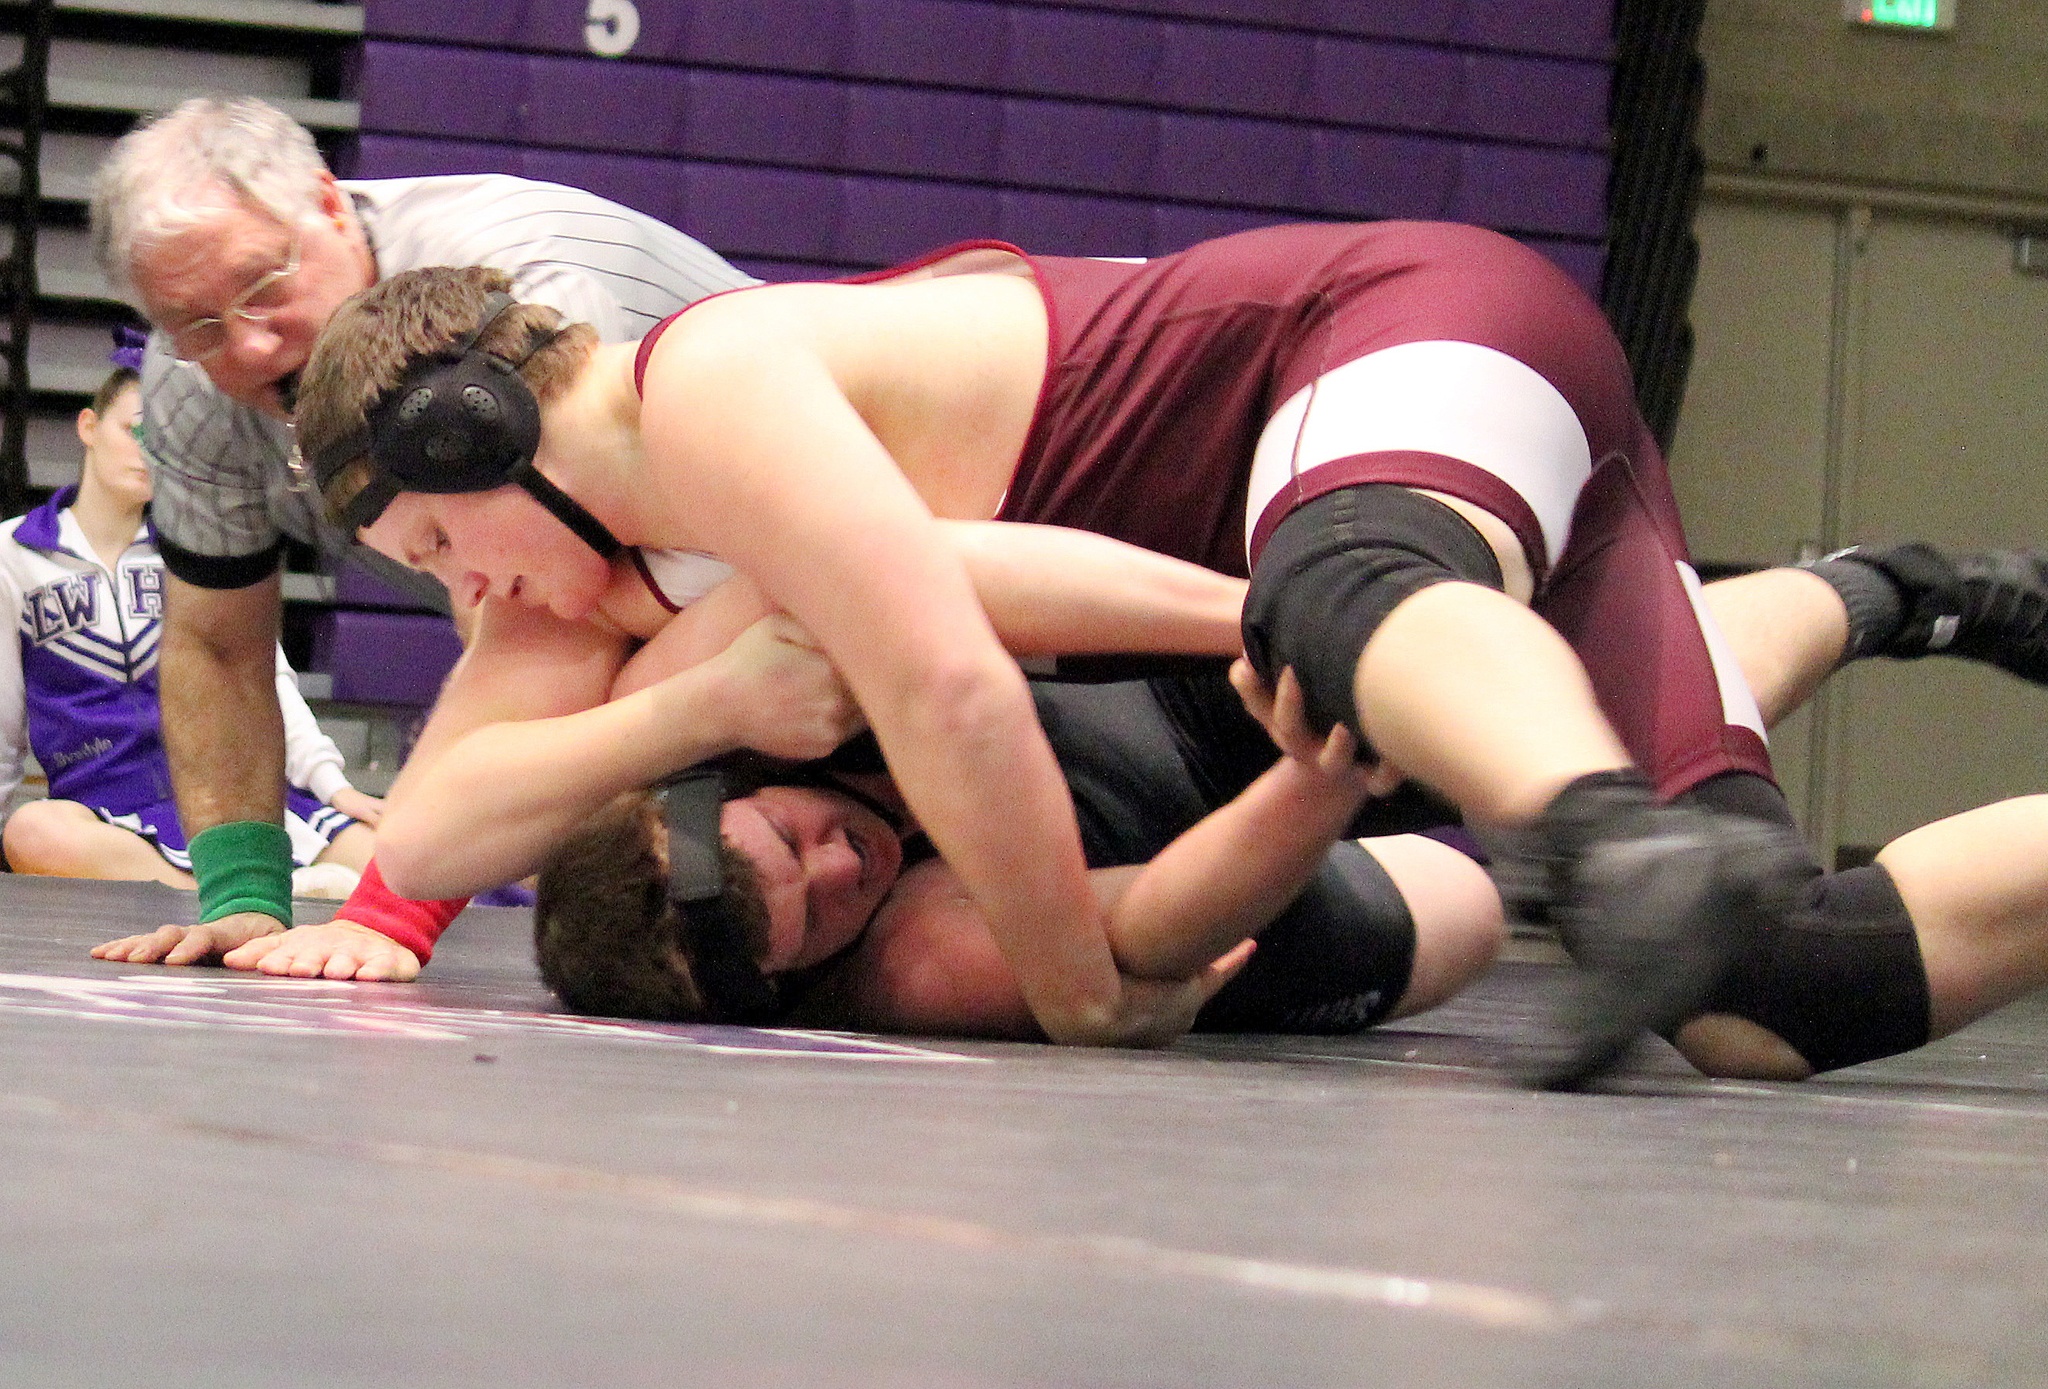 The Mercer Island Islanders wrestling team captured a 39-31 victory against the Lake Washington Kangaroos on Jan. 12. Mercer Island grapplers earning victories via pins included Piljin Kwak (145), Finn Childress (152), Colin Farrell (170), Connor Hill (195) and Teague Frazier (220). Islanders’ wrestlers winning by decision included Eli Pruchno, Donnie Howard (182) and Jordan Tillinger (113). Frazier (pictured) pinned Lake Washington’s Andy Davis in the first round of the 220-pound matchup.                                Photo courtesy of Jamie Childress